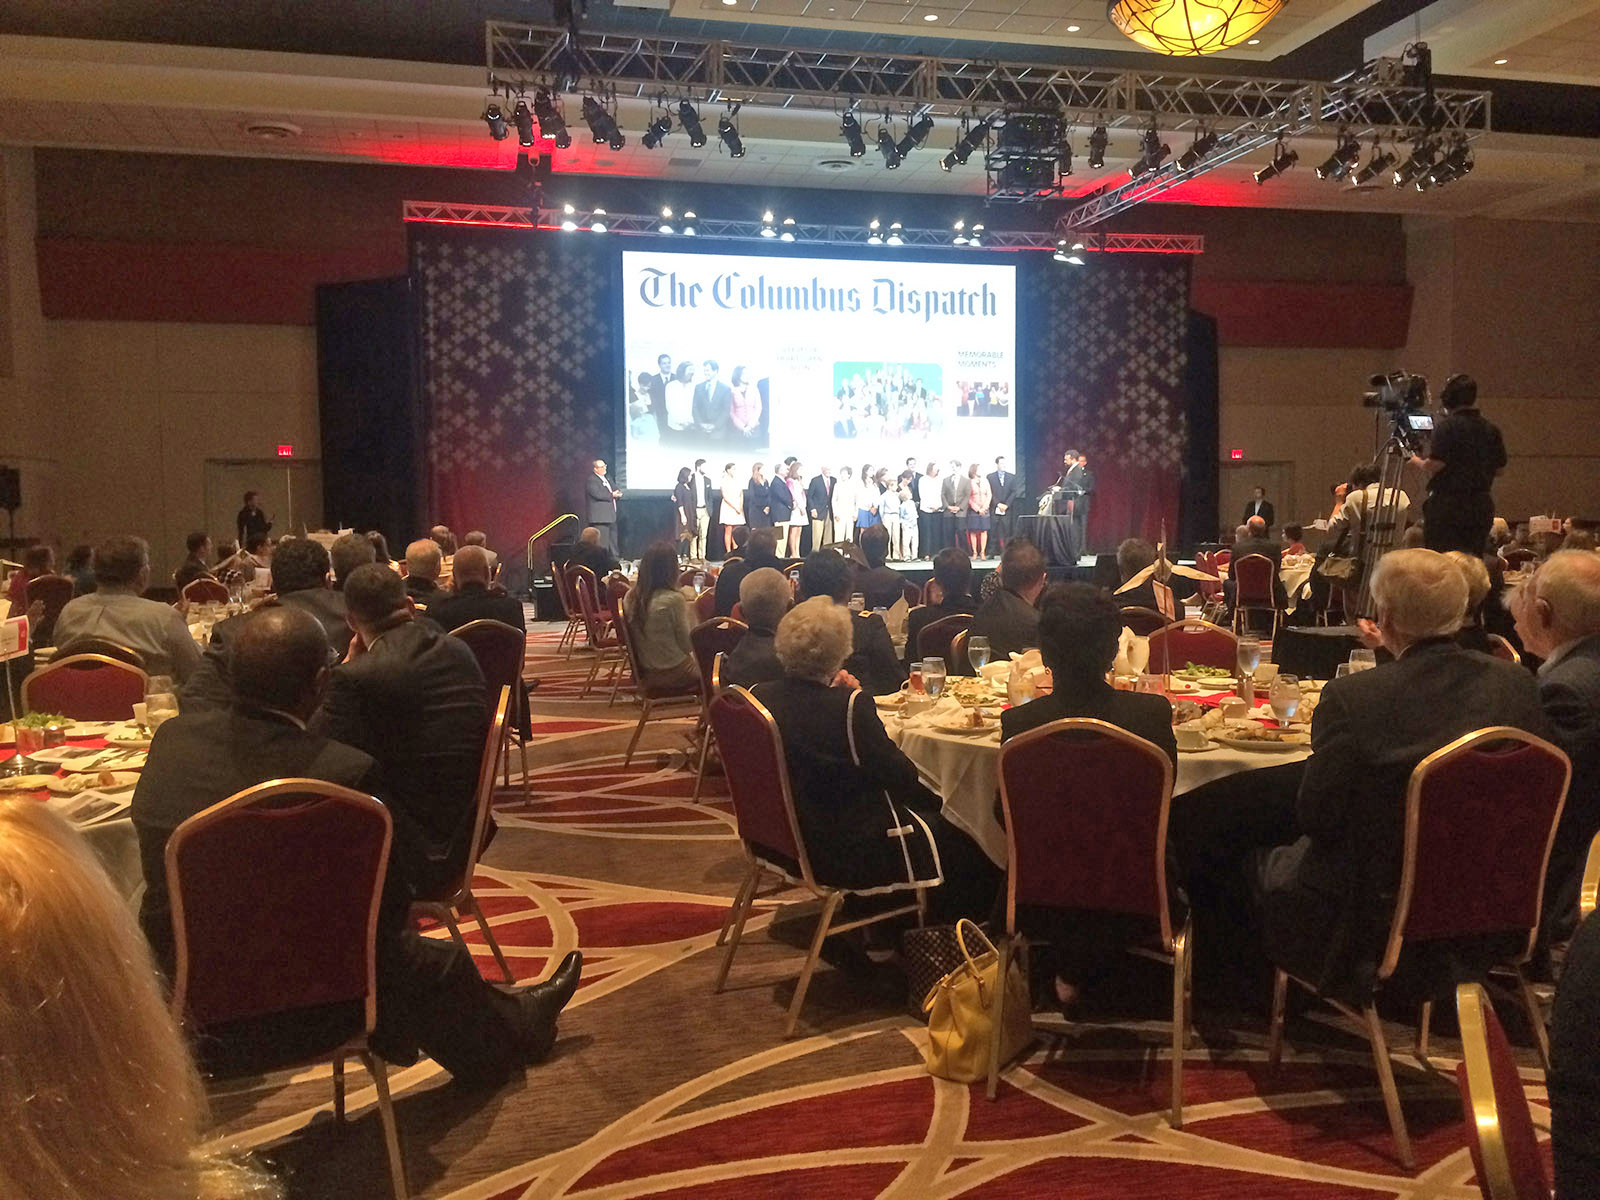 IVP produced the video stories for the 2014 Humanitarian of the Year event at the Hyatt Regency in Columbus, Ohio.